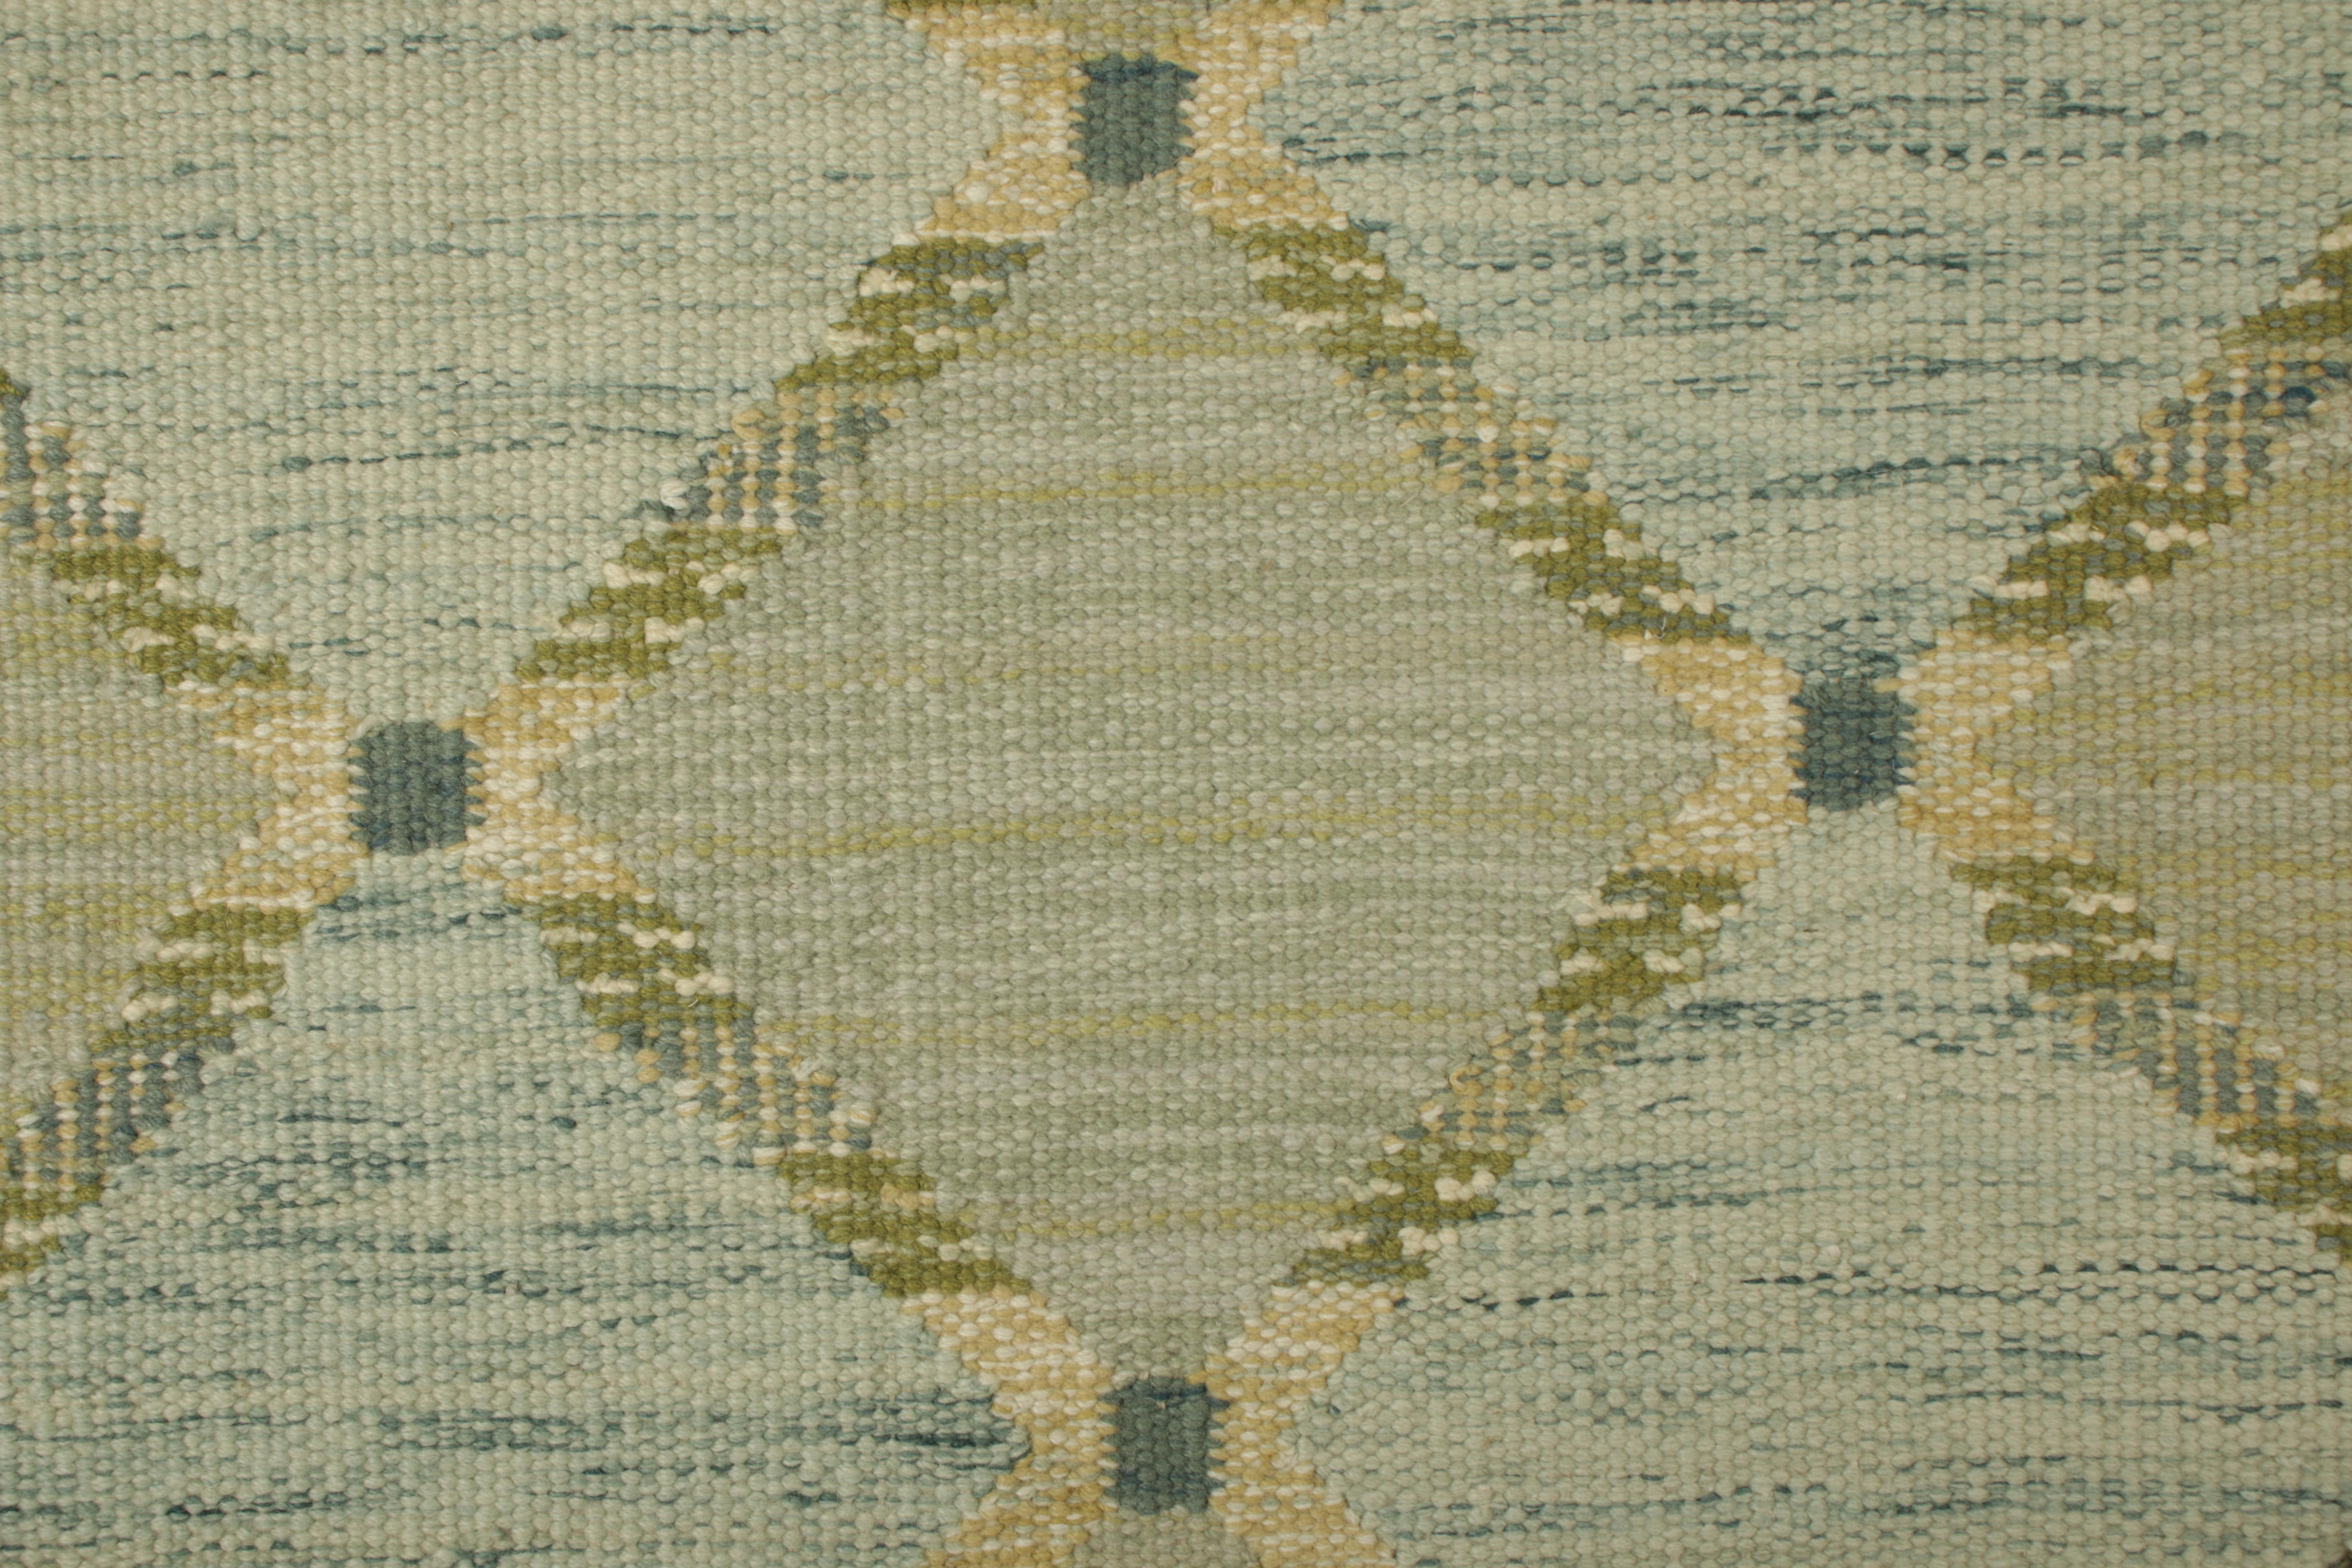 From an exciting new collection of gift-size pieces, this 3x3 Swedish-inspired rug is a bold new addition to the Scandinavian Collection by Rug & Kilim. Handwoven in a wool flatweave with undyed natural yarns as well, its design is inspired by